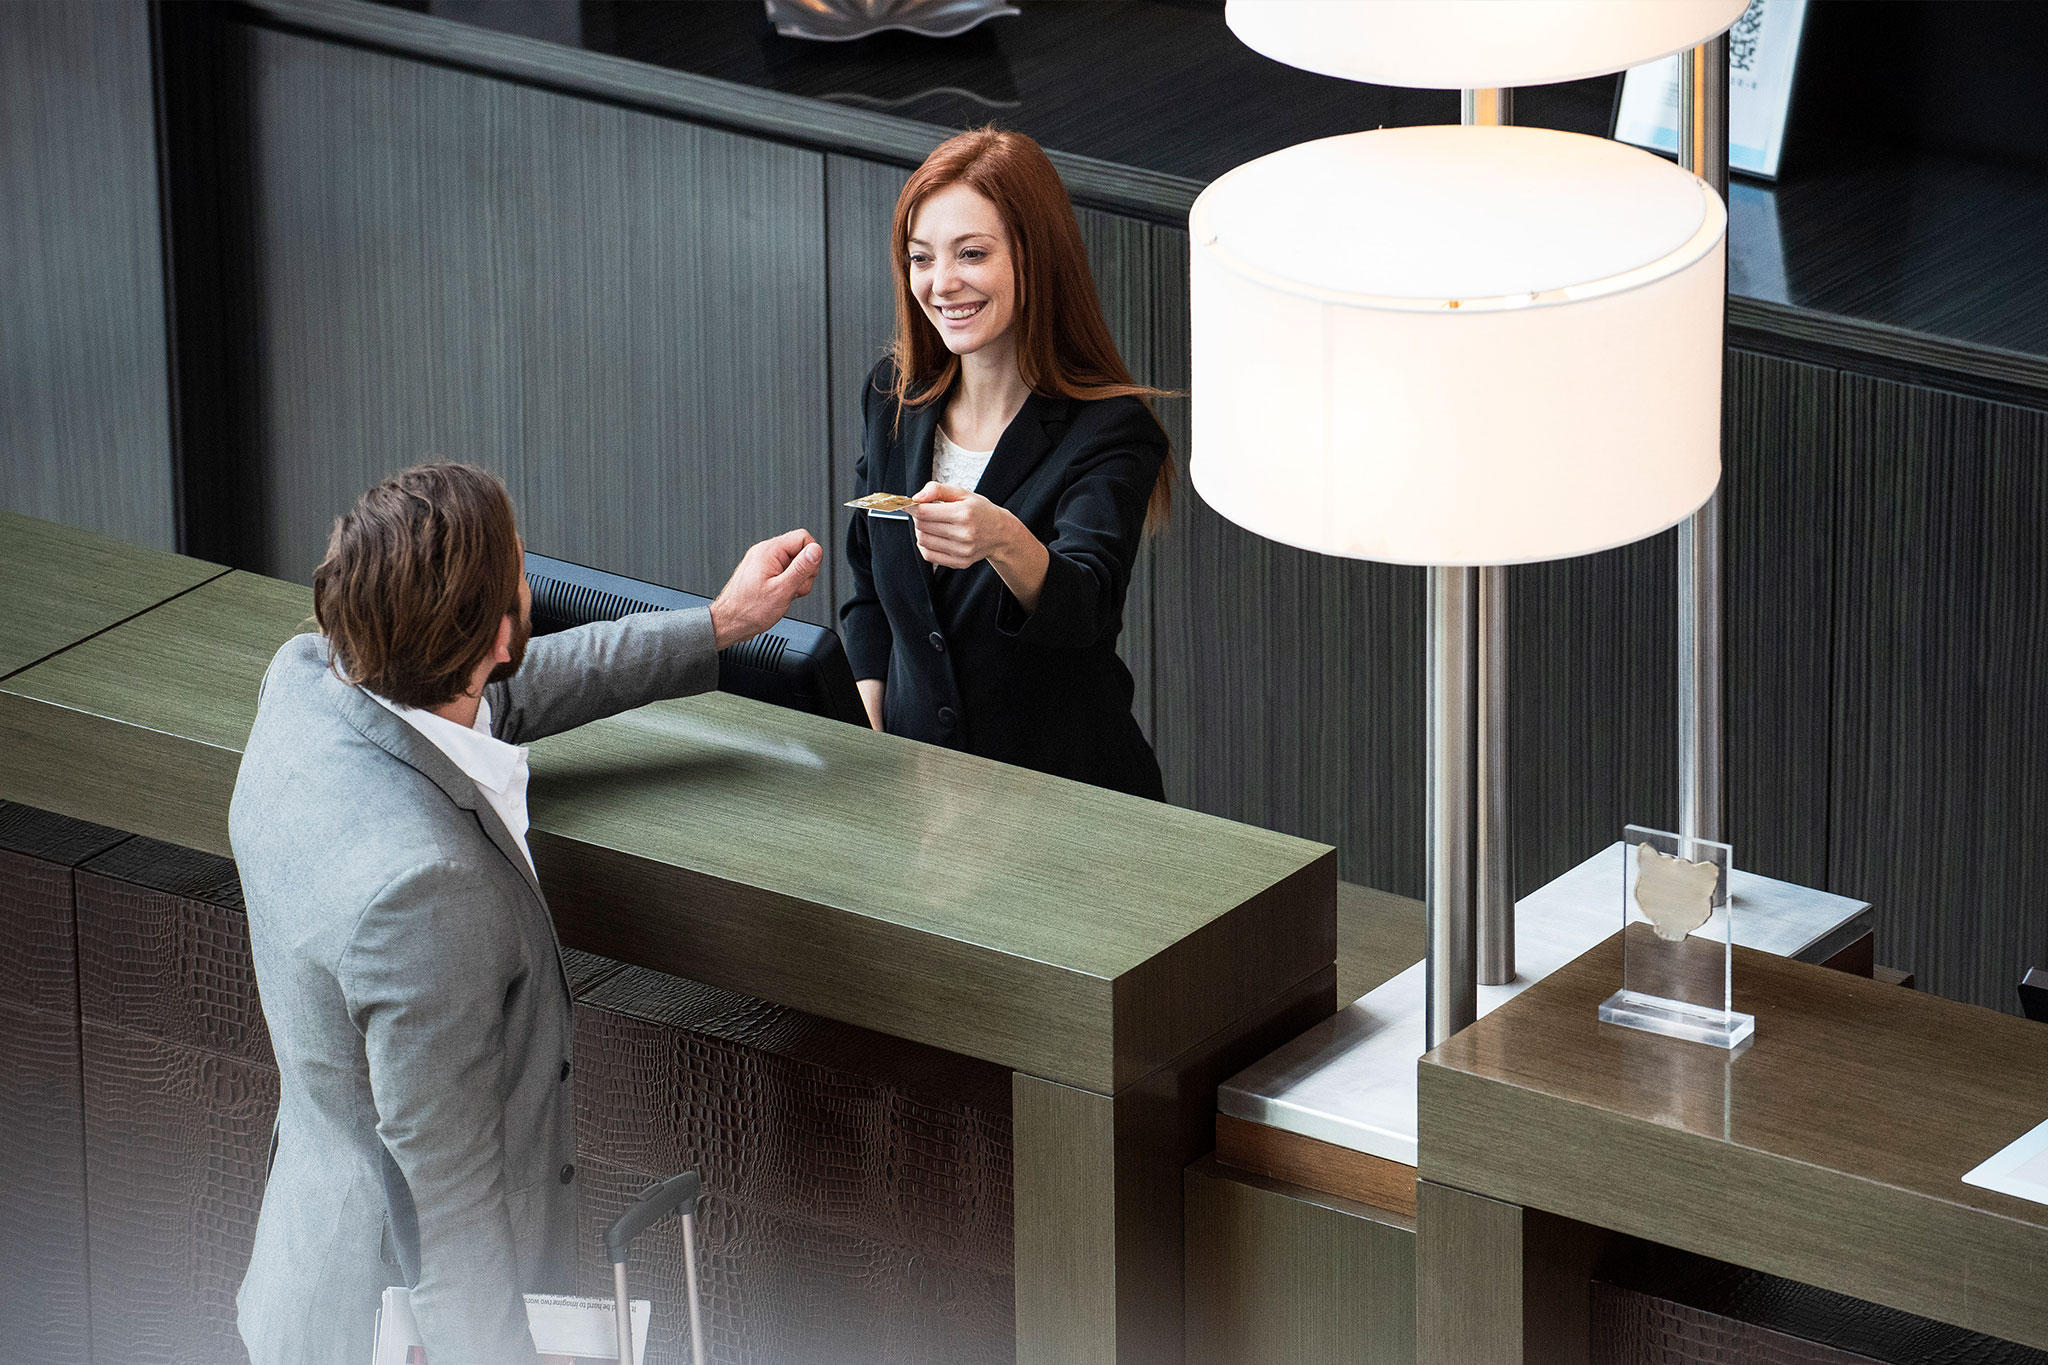 man checking into a hotel. Hotel clerk giving man room key